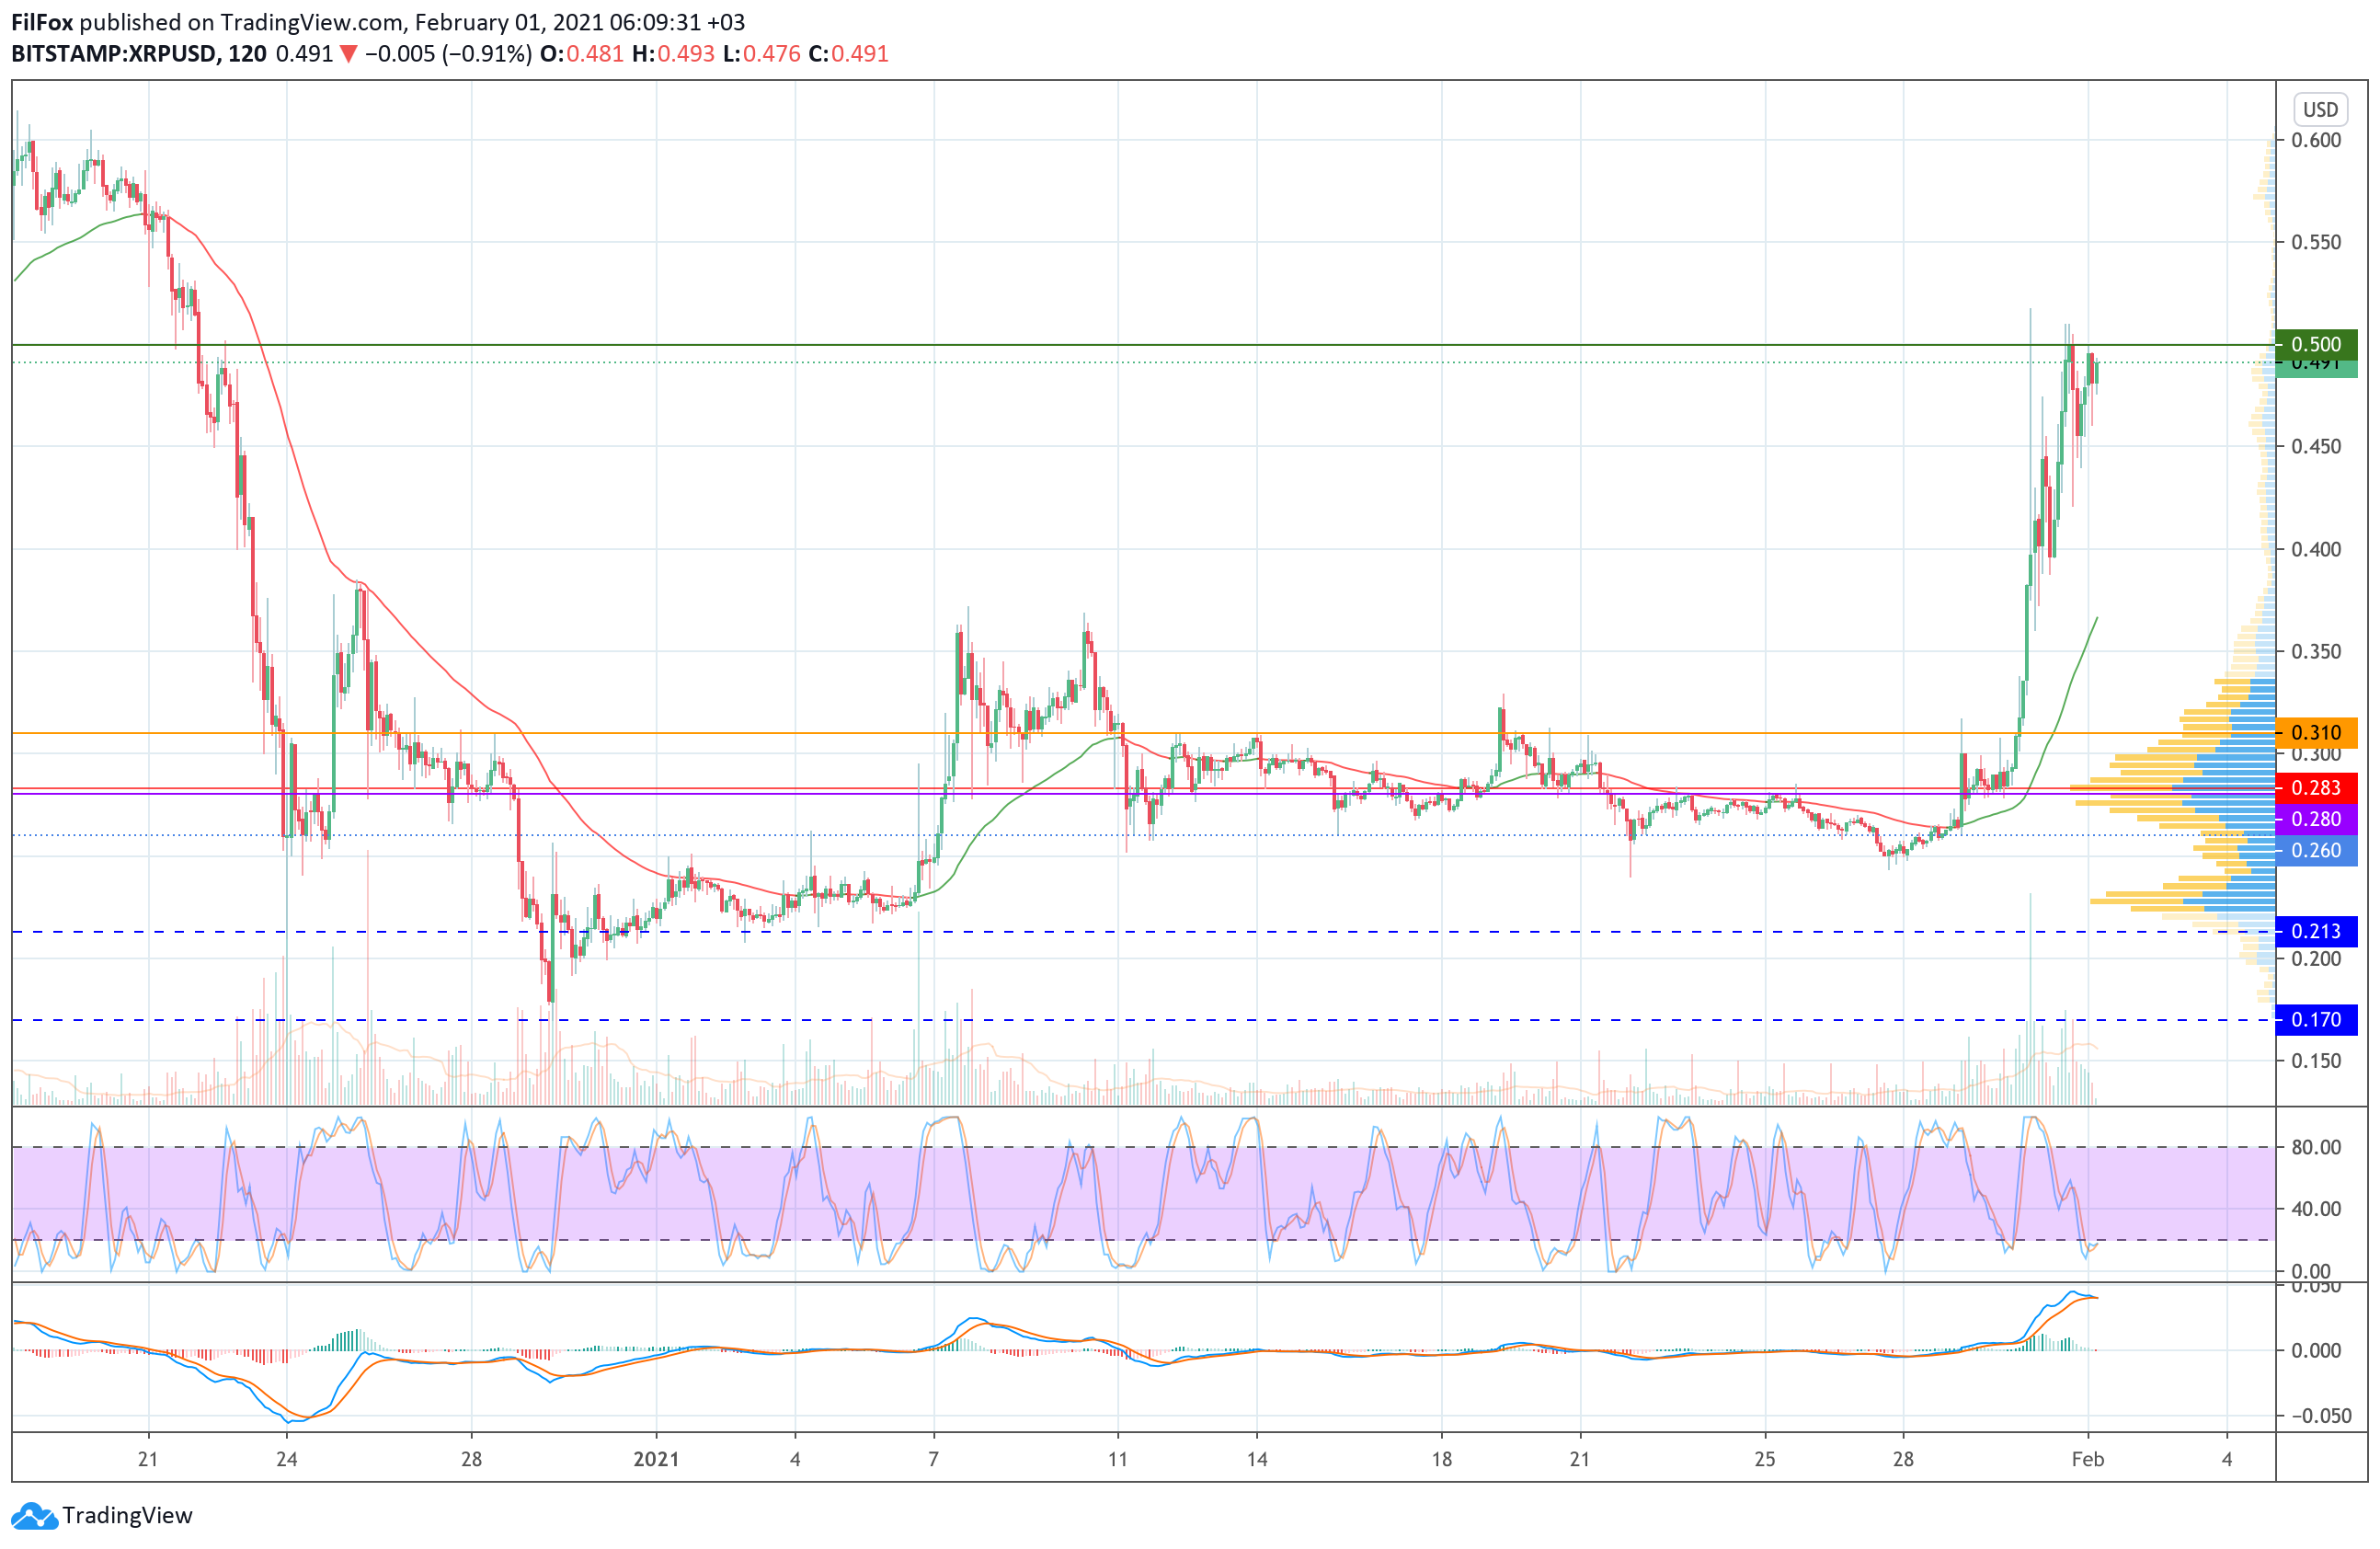 Analysis of prices for Bitcoin, Ethereum, Ripple for 02/01/2021